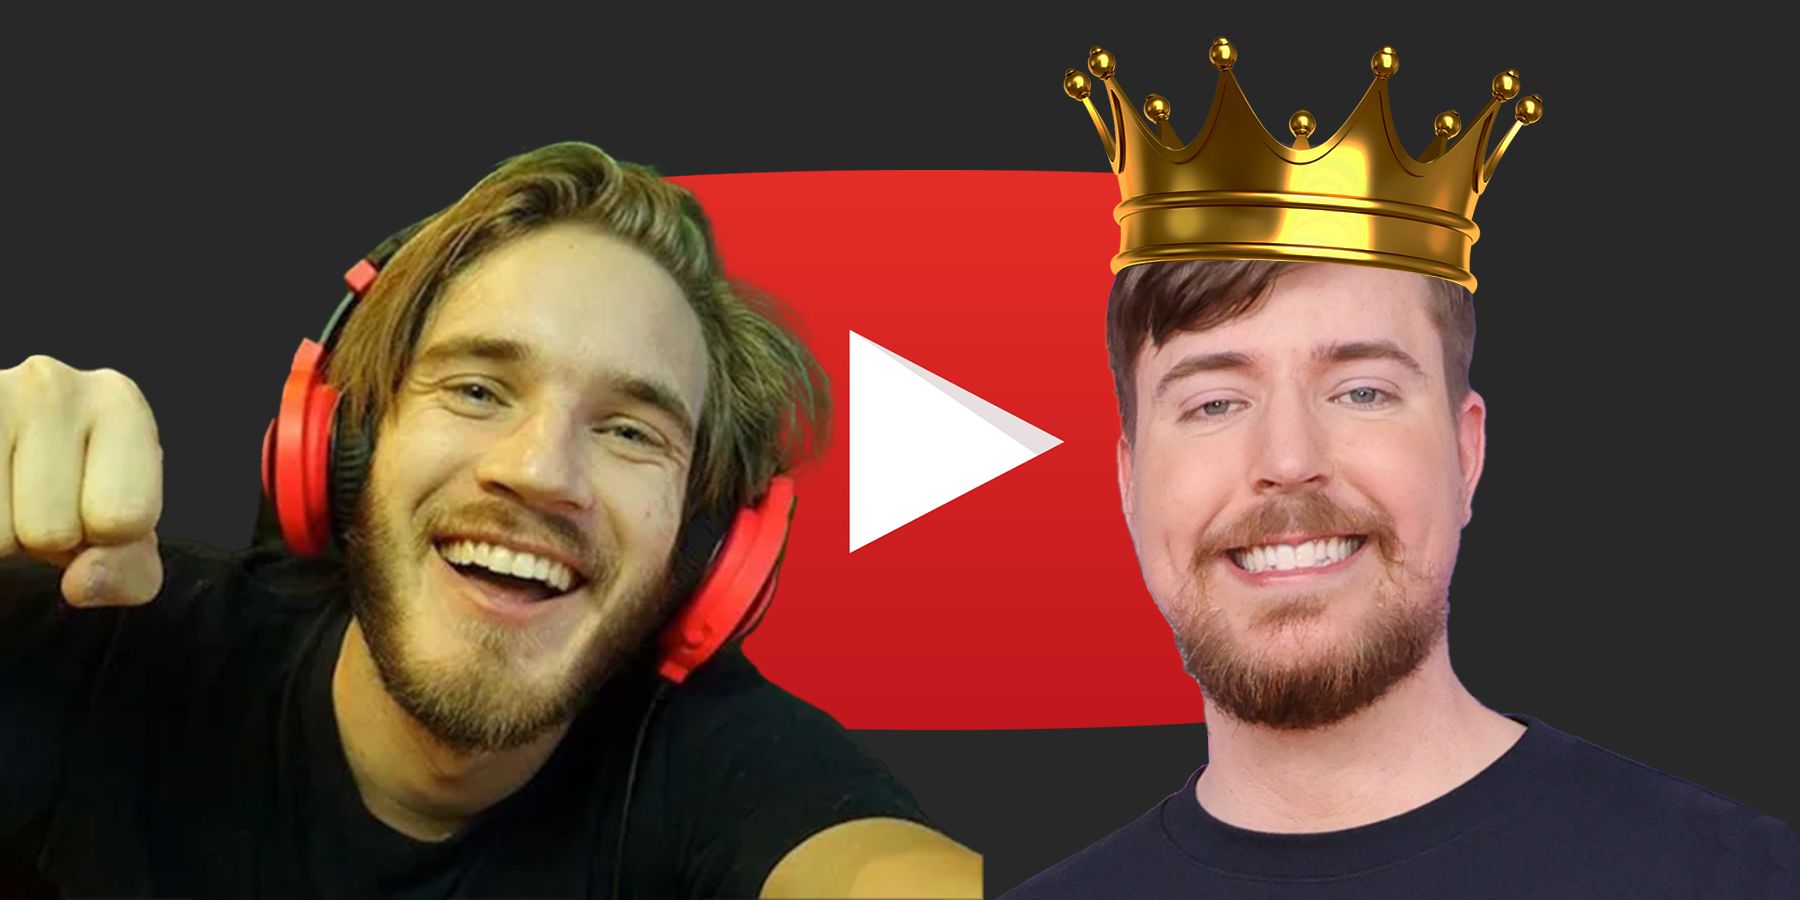 pewdiepie-mrbeast-youtube-subscribers-delete-account-old-promise-1